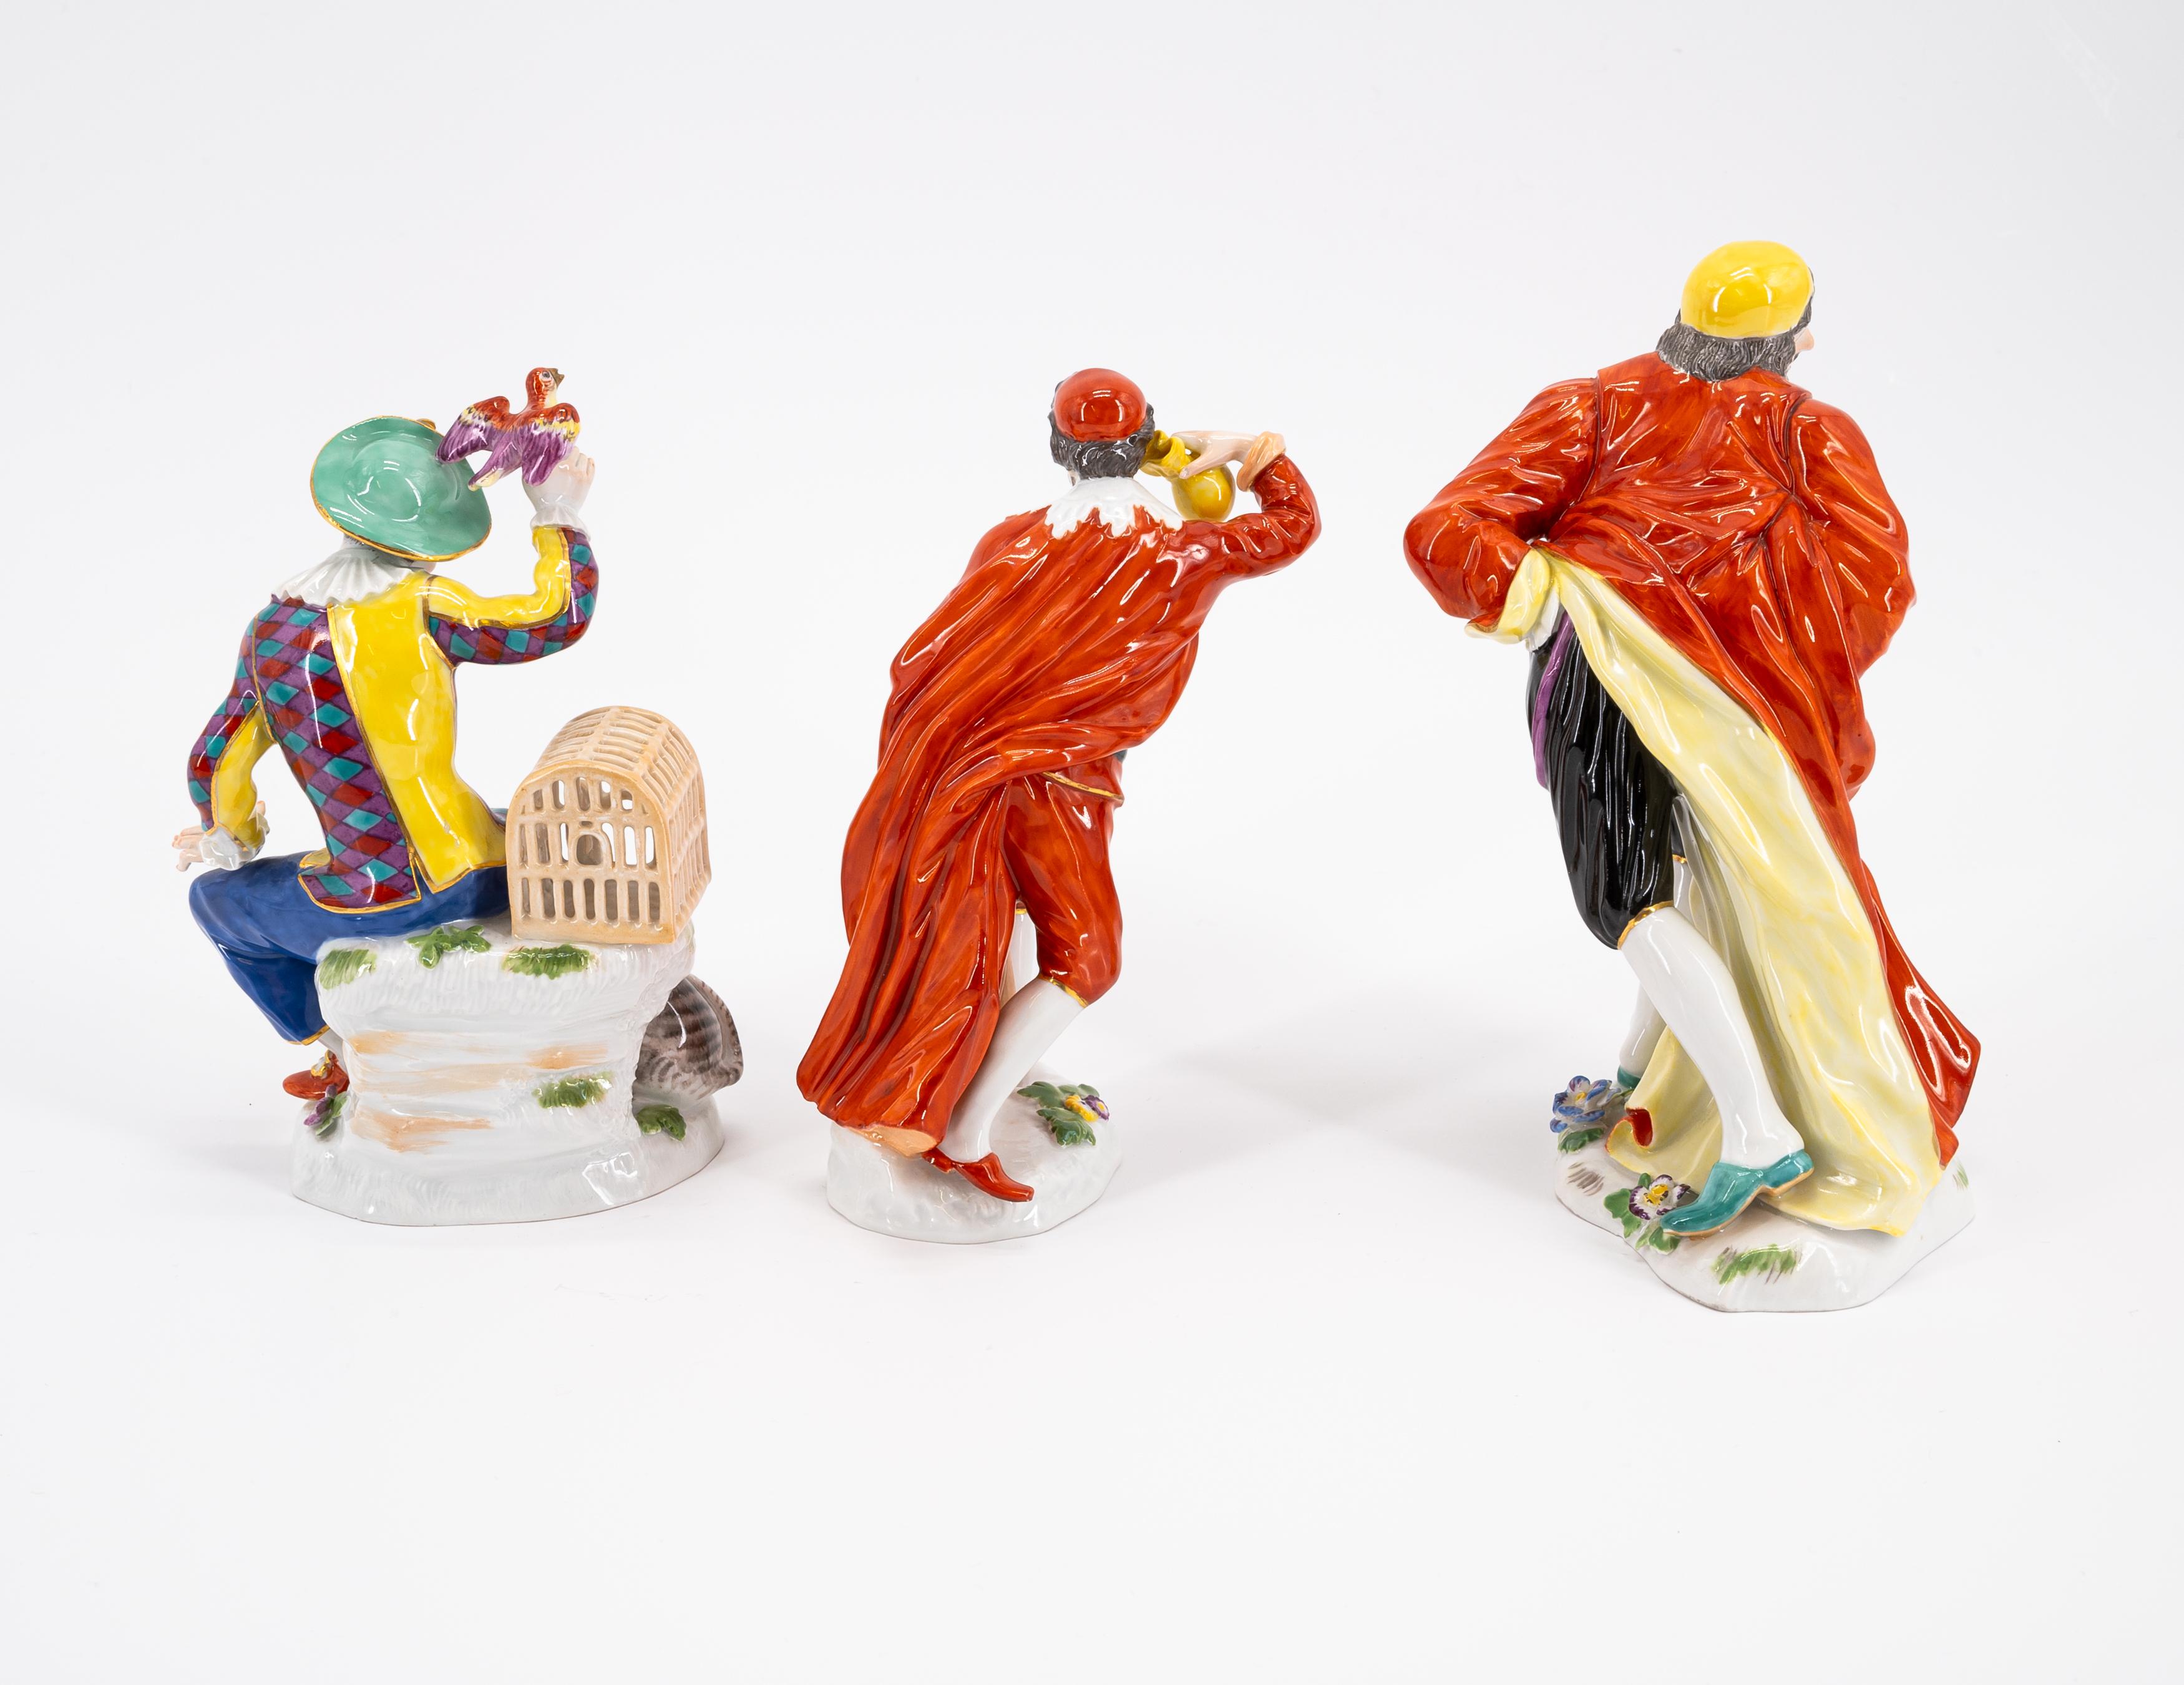 FOUR LARGE AND THREE SMALL PORCELAIN FIGURINES FROM THE COMMEDIA DELL'ARTE - Image 3 of 10